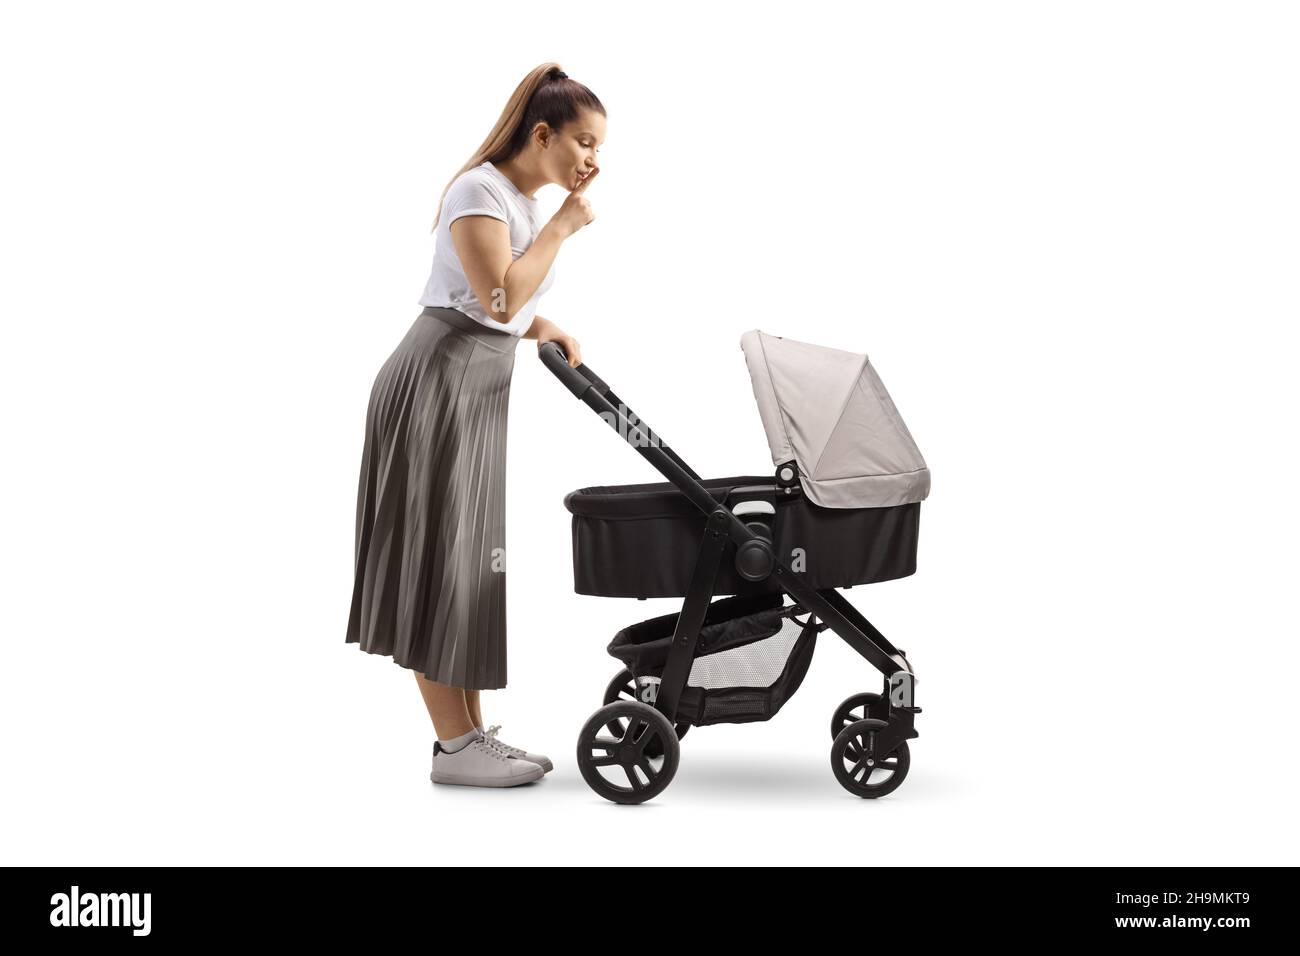 Full length profile shot of a young mother shushing her baby in a pushchair isolated on white background Stock Photo